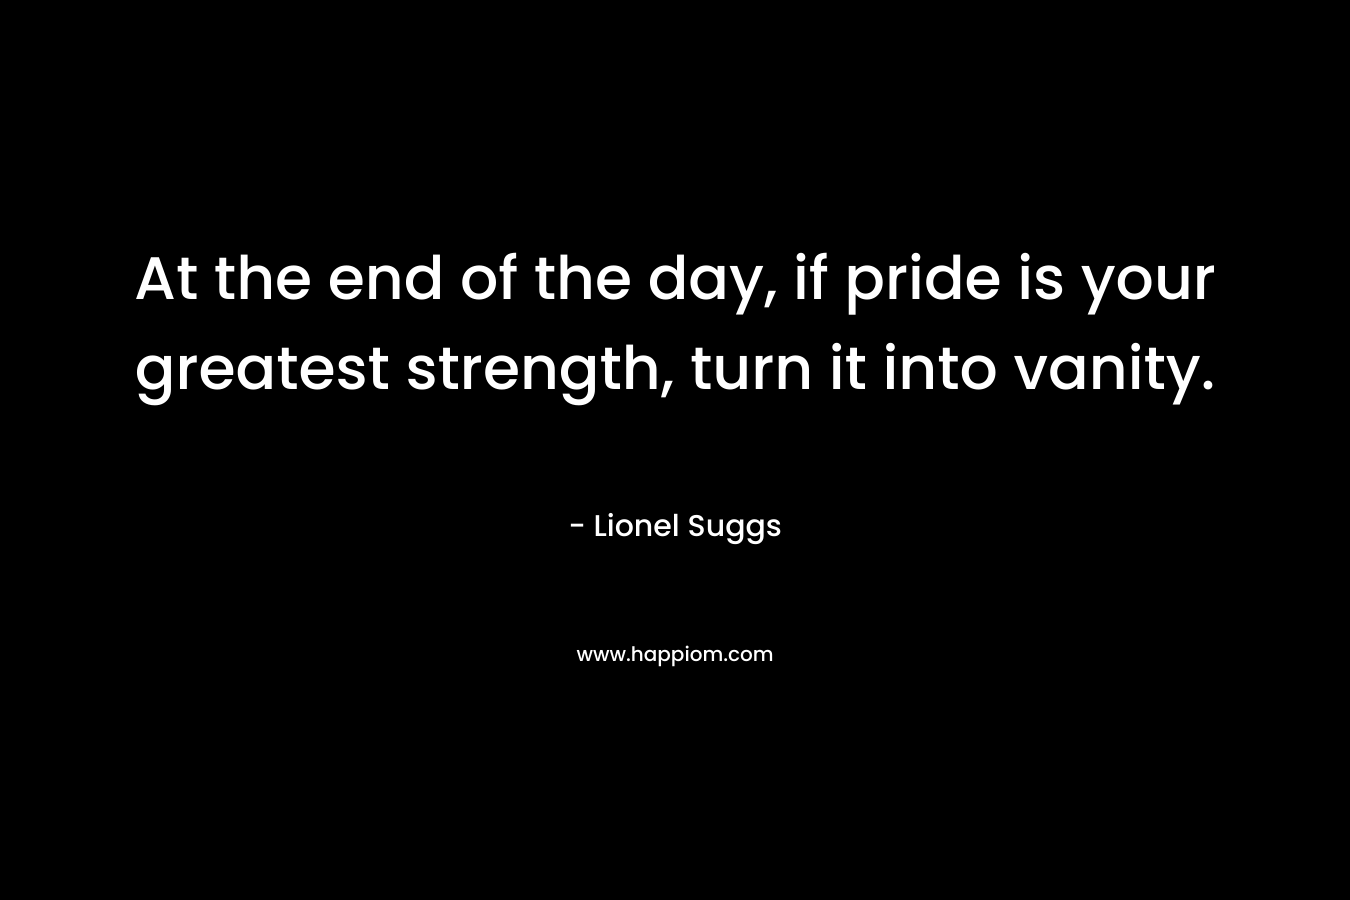 At the end of the day, if pride is your greatest strength, turn it into vanity. – Lionel Suggs